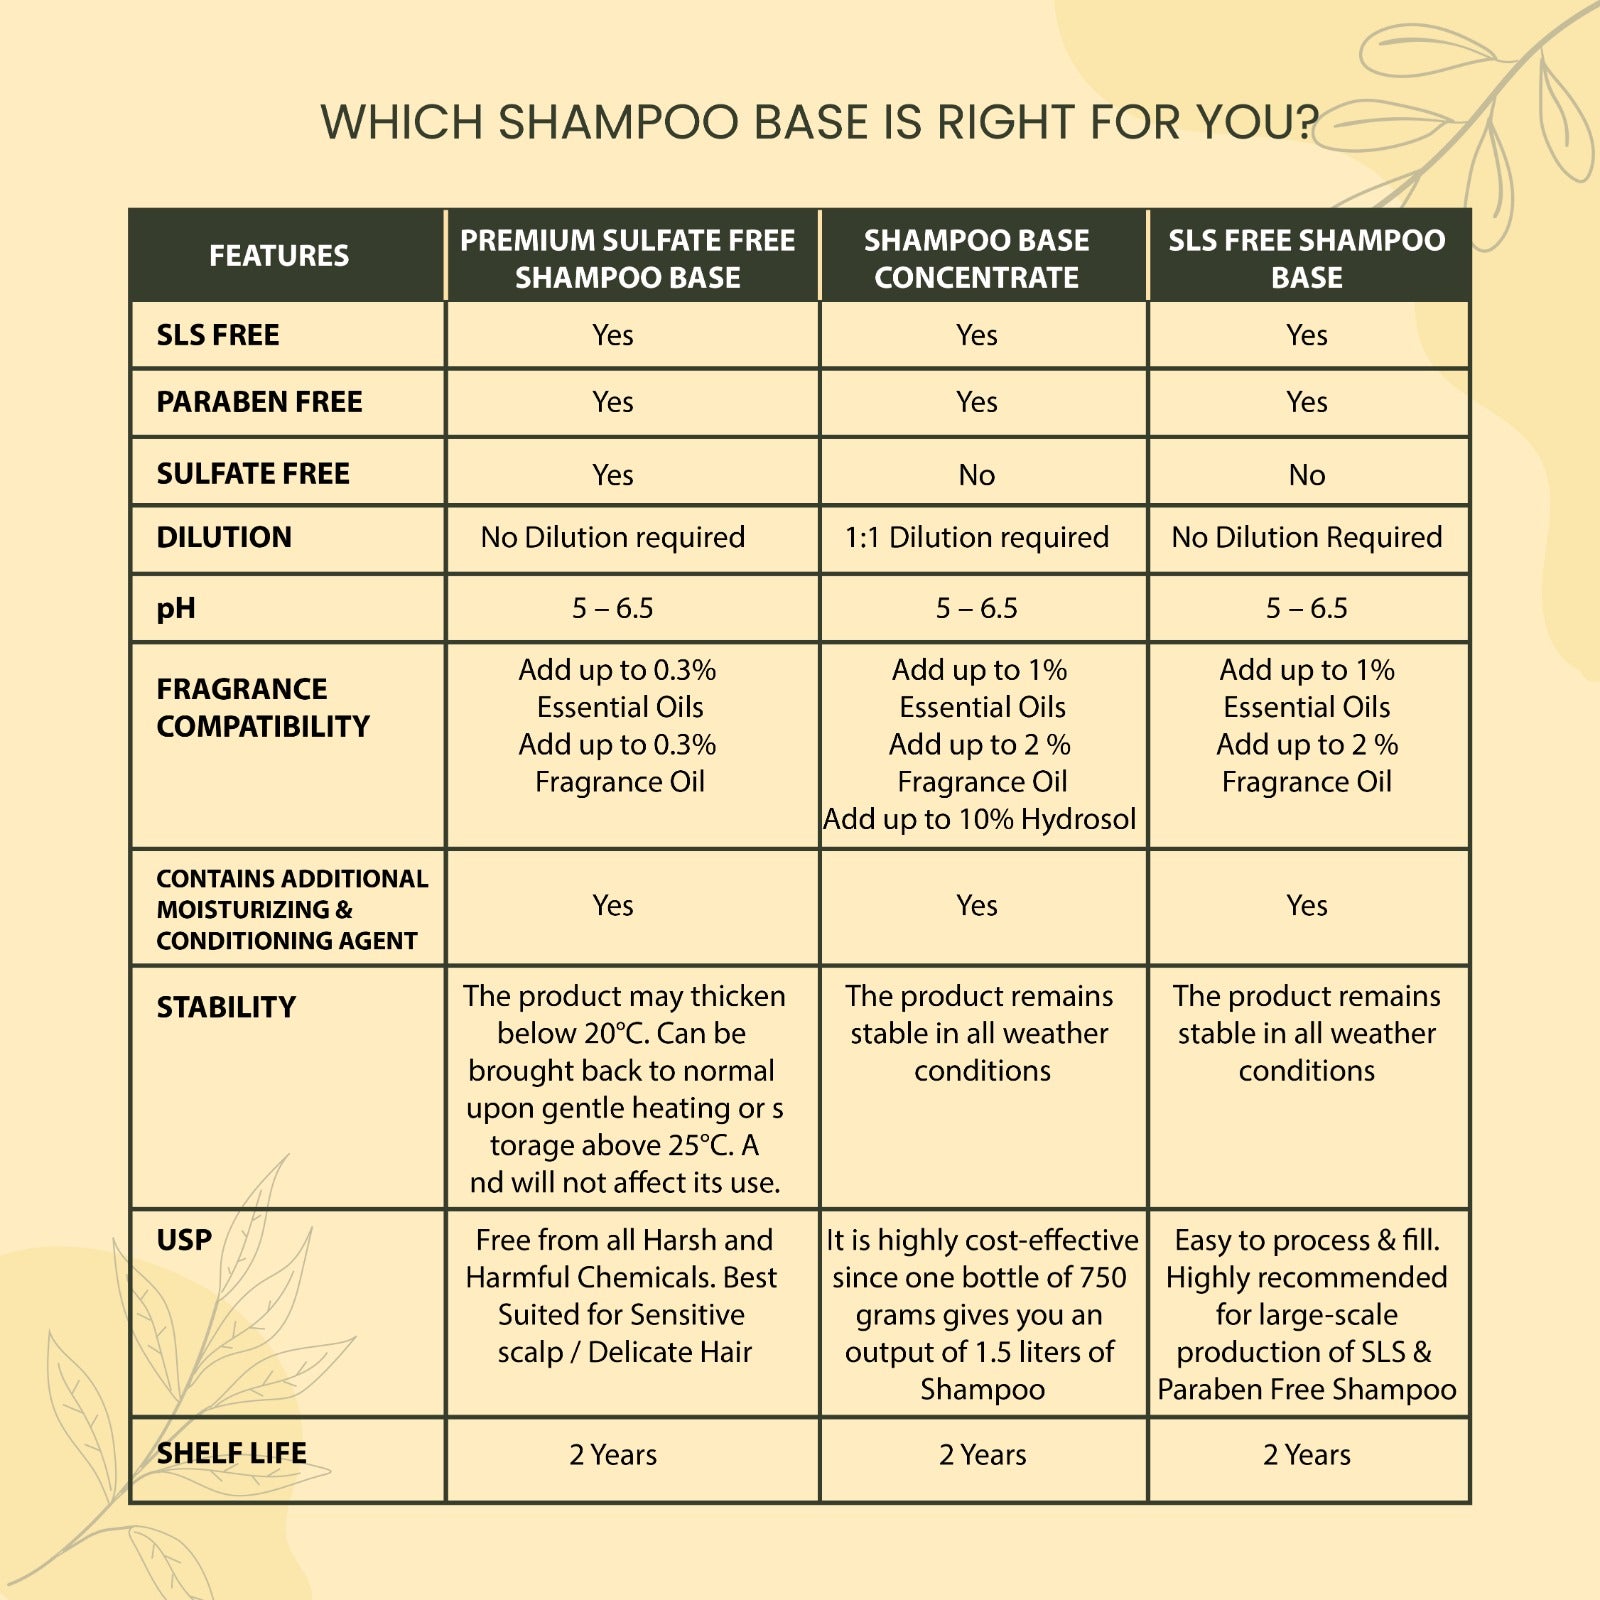 Pearly Shampoo Base Concentrate